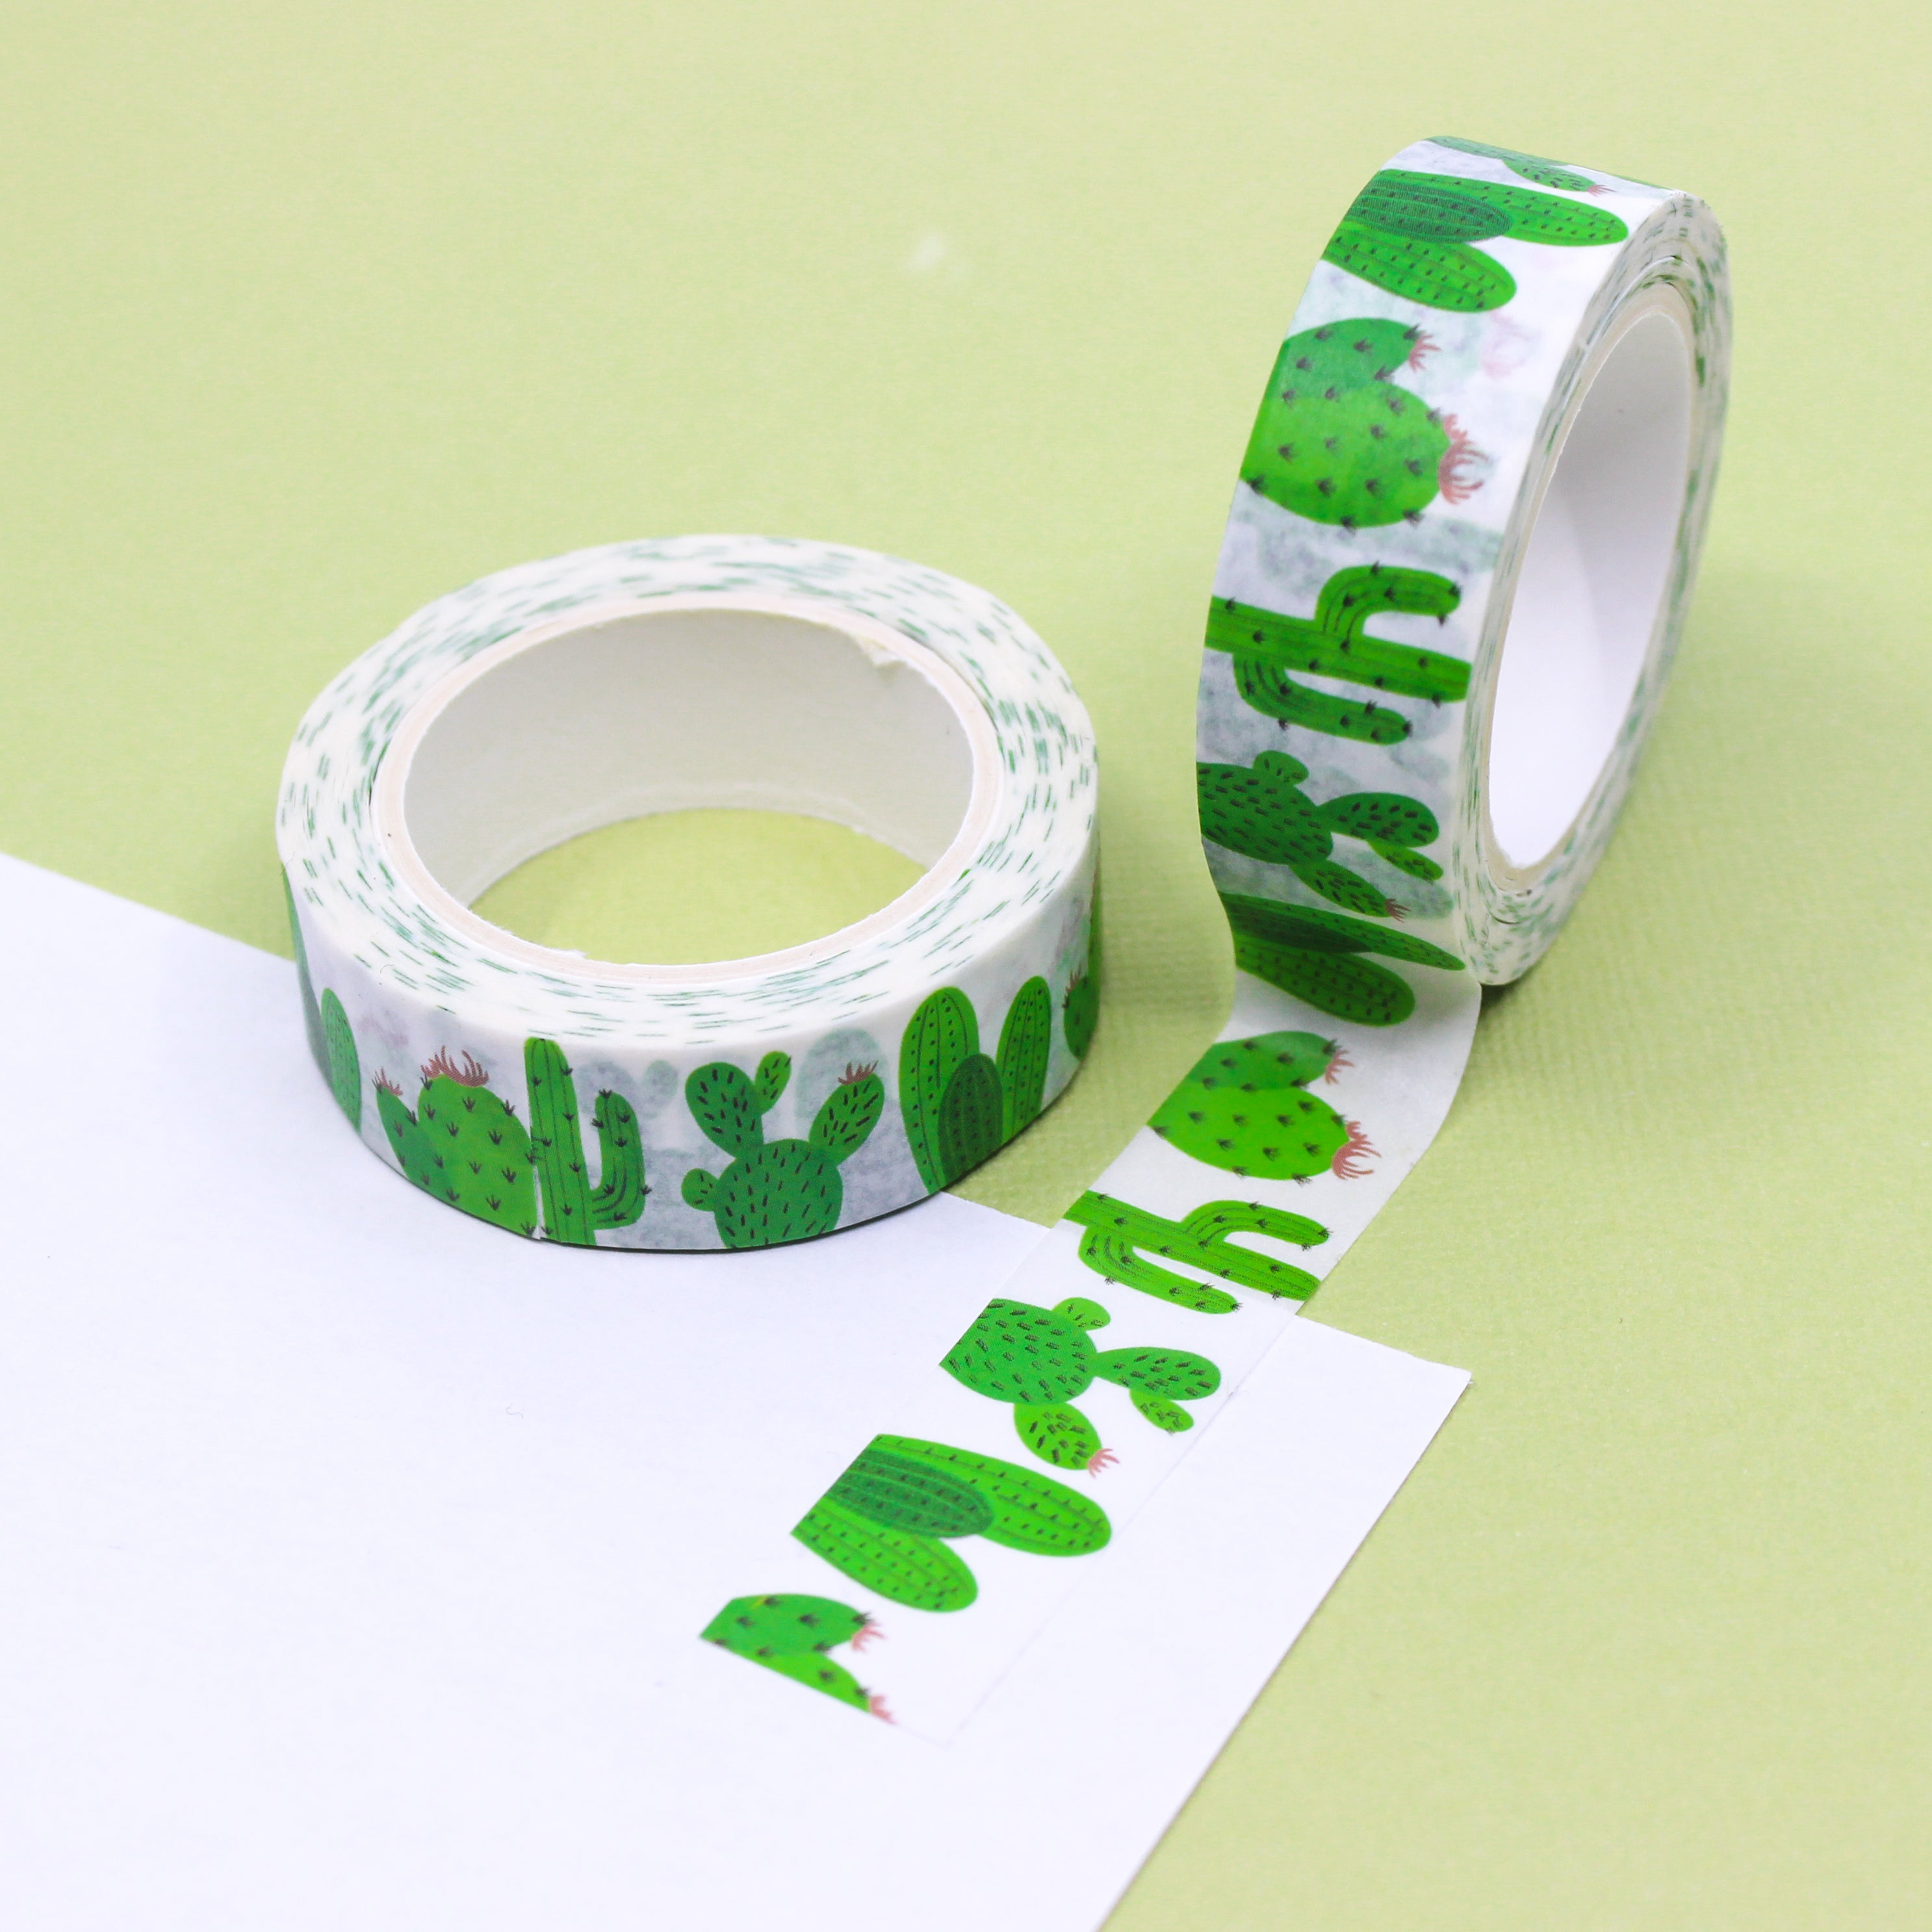 Elevate your crafts with our Cute Cactus Washi Tape, adorned with charming cactus illustrations. Ideal for adding a touch of desert charm and whimsy to your projects. This tape is sold at BBB Supplies Craft Shop.